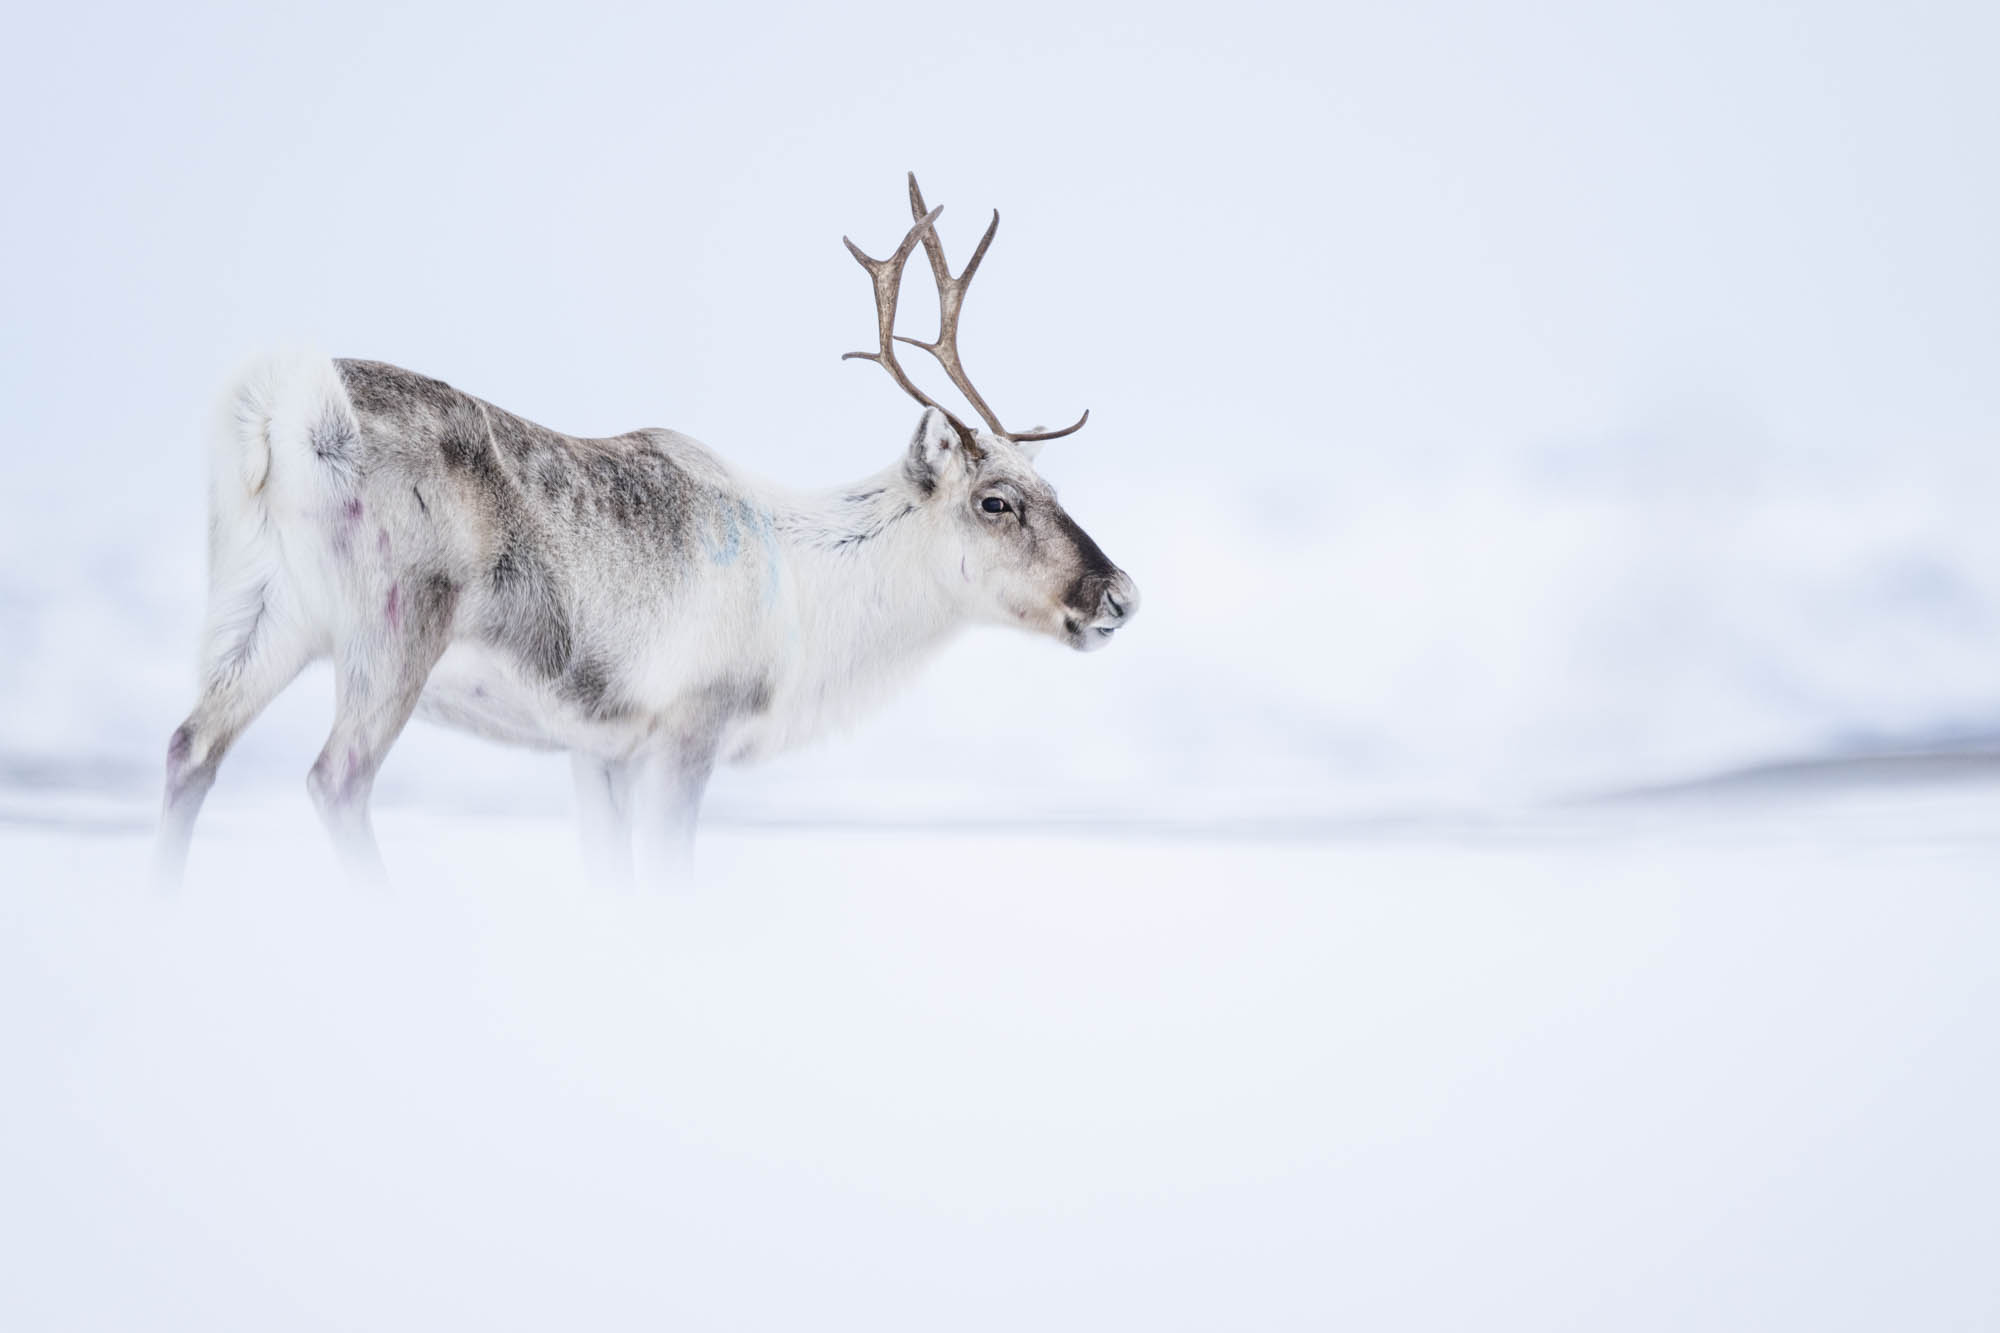 A deer surrounded by snow